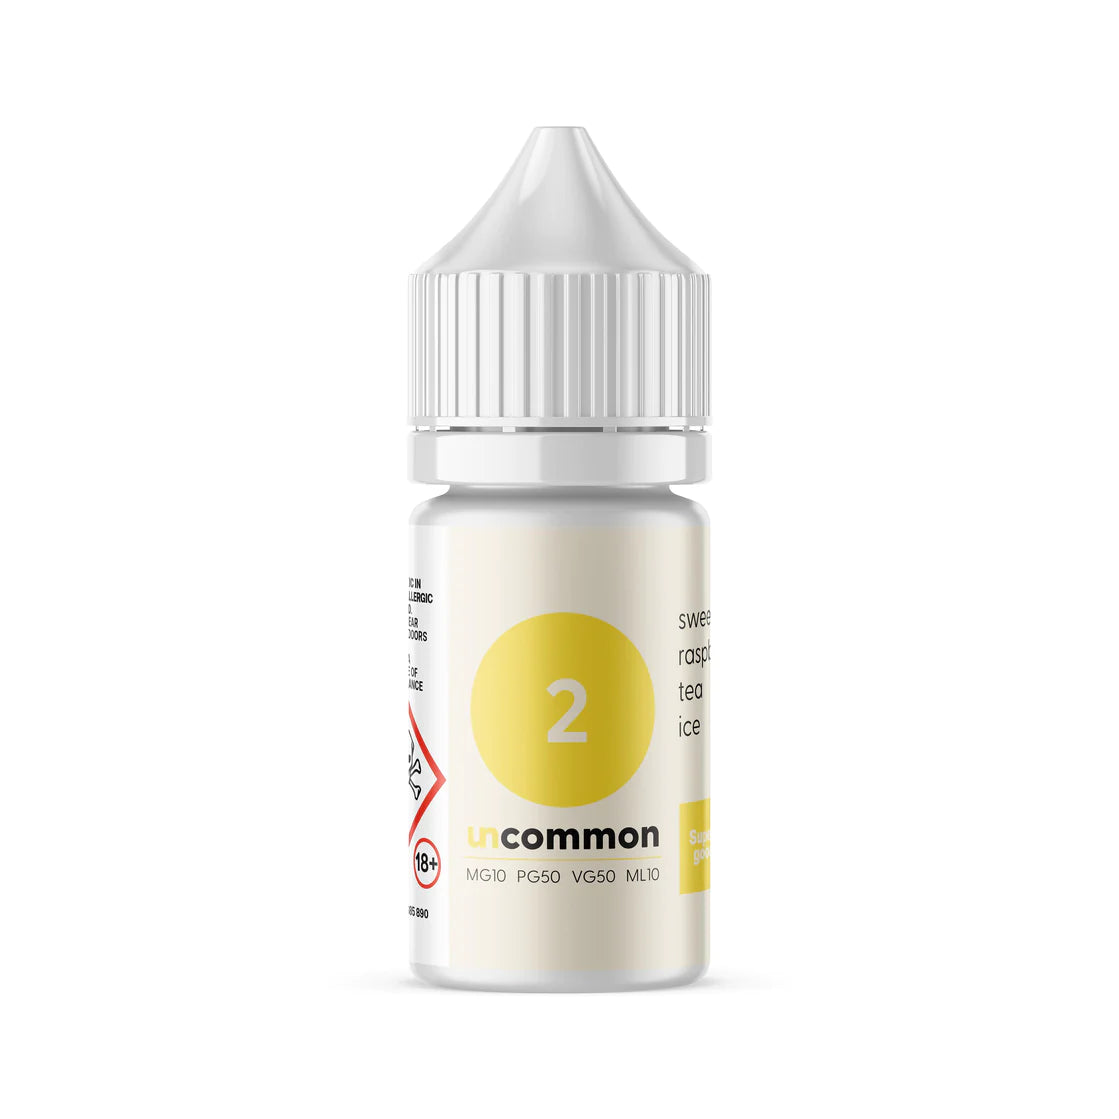 UNCOMMON SALTS BY SUPERGOOD X GRIMMGREEN 10ML 20MG